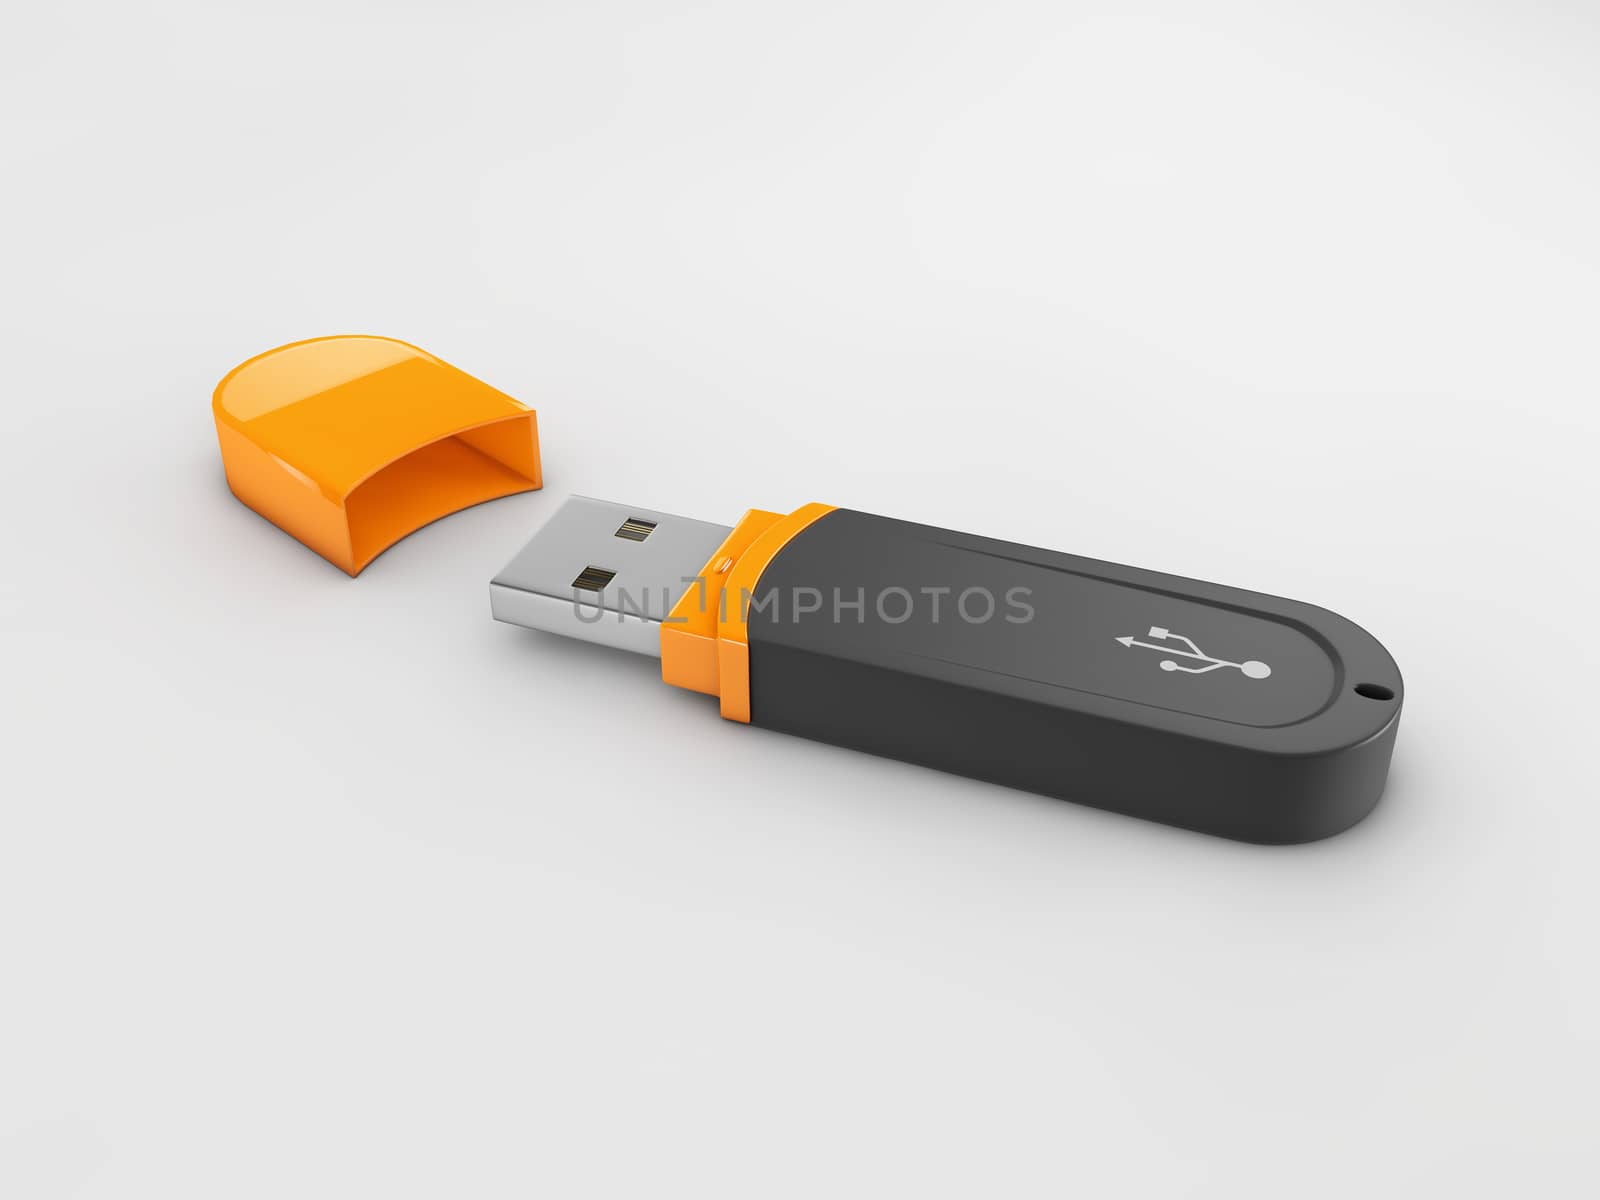 3d Illustration of USB memory isolated on white. USB memory with black and yellow body by tussik